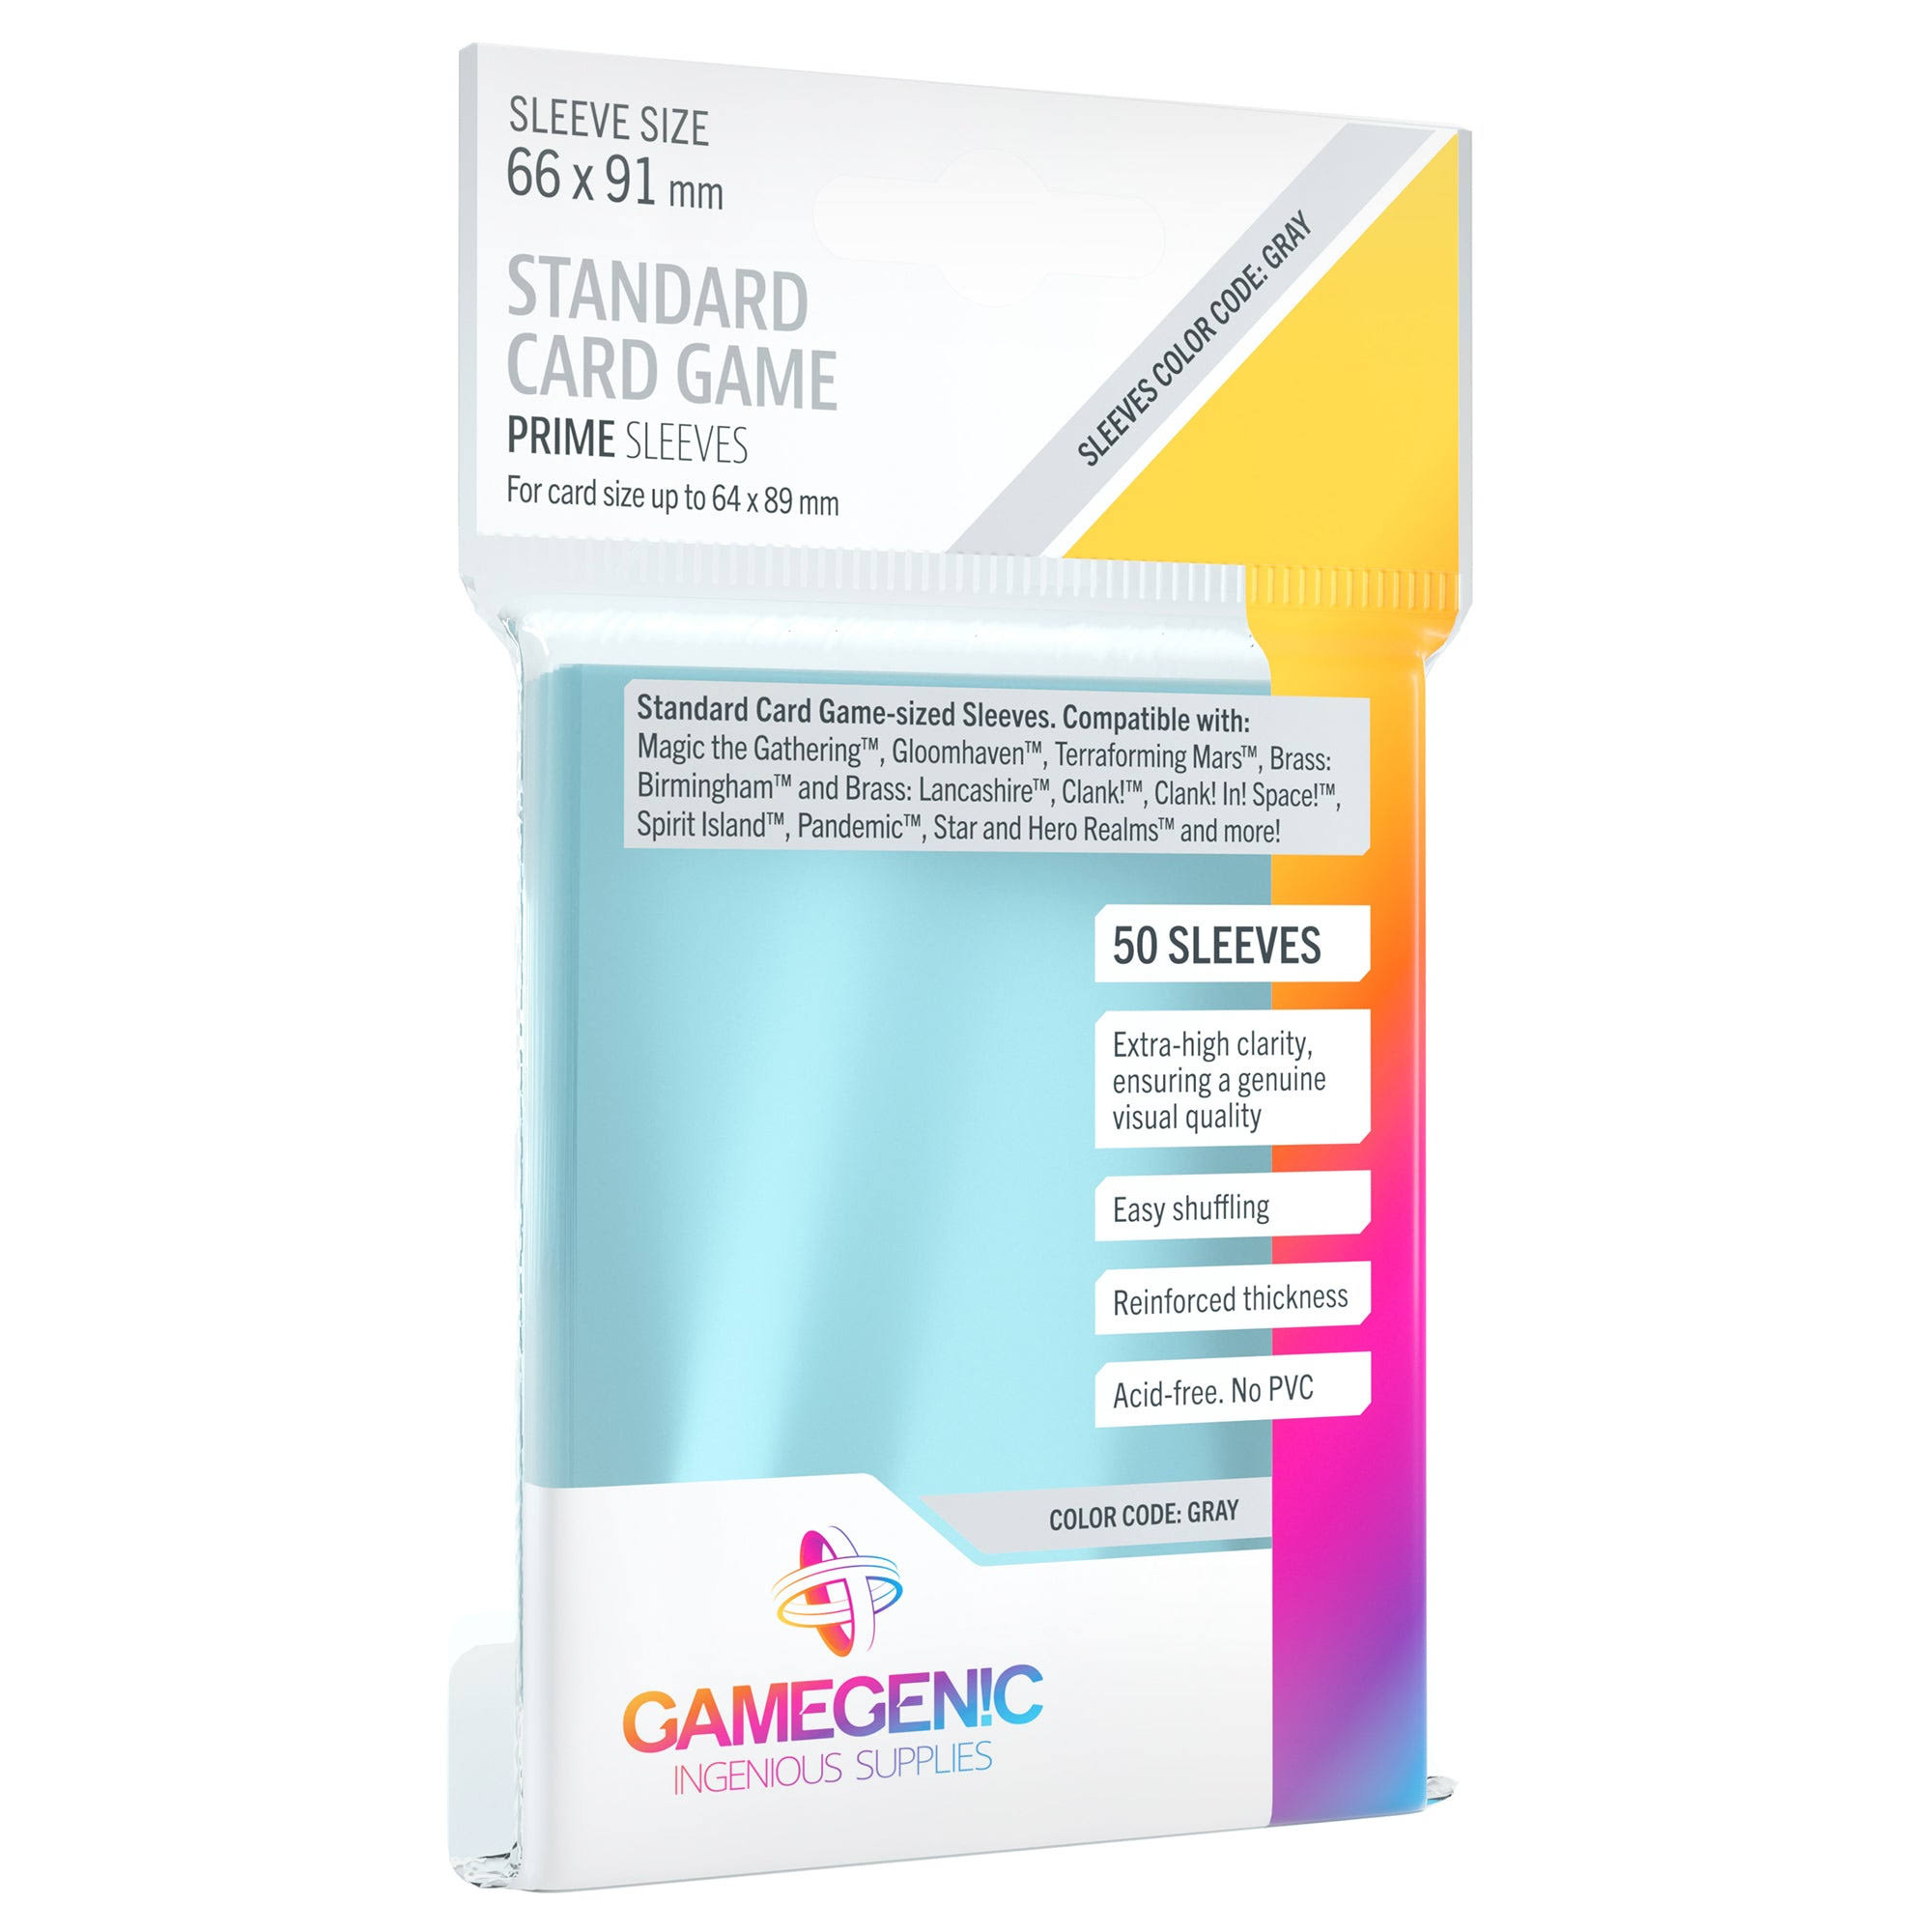 Gamegenic Prime Standard Card Game 66 x 91 mm - 50 Sleeves